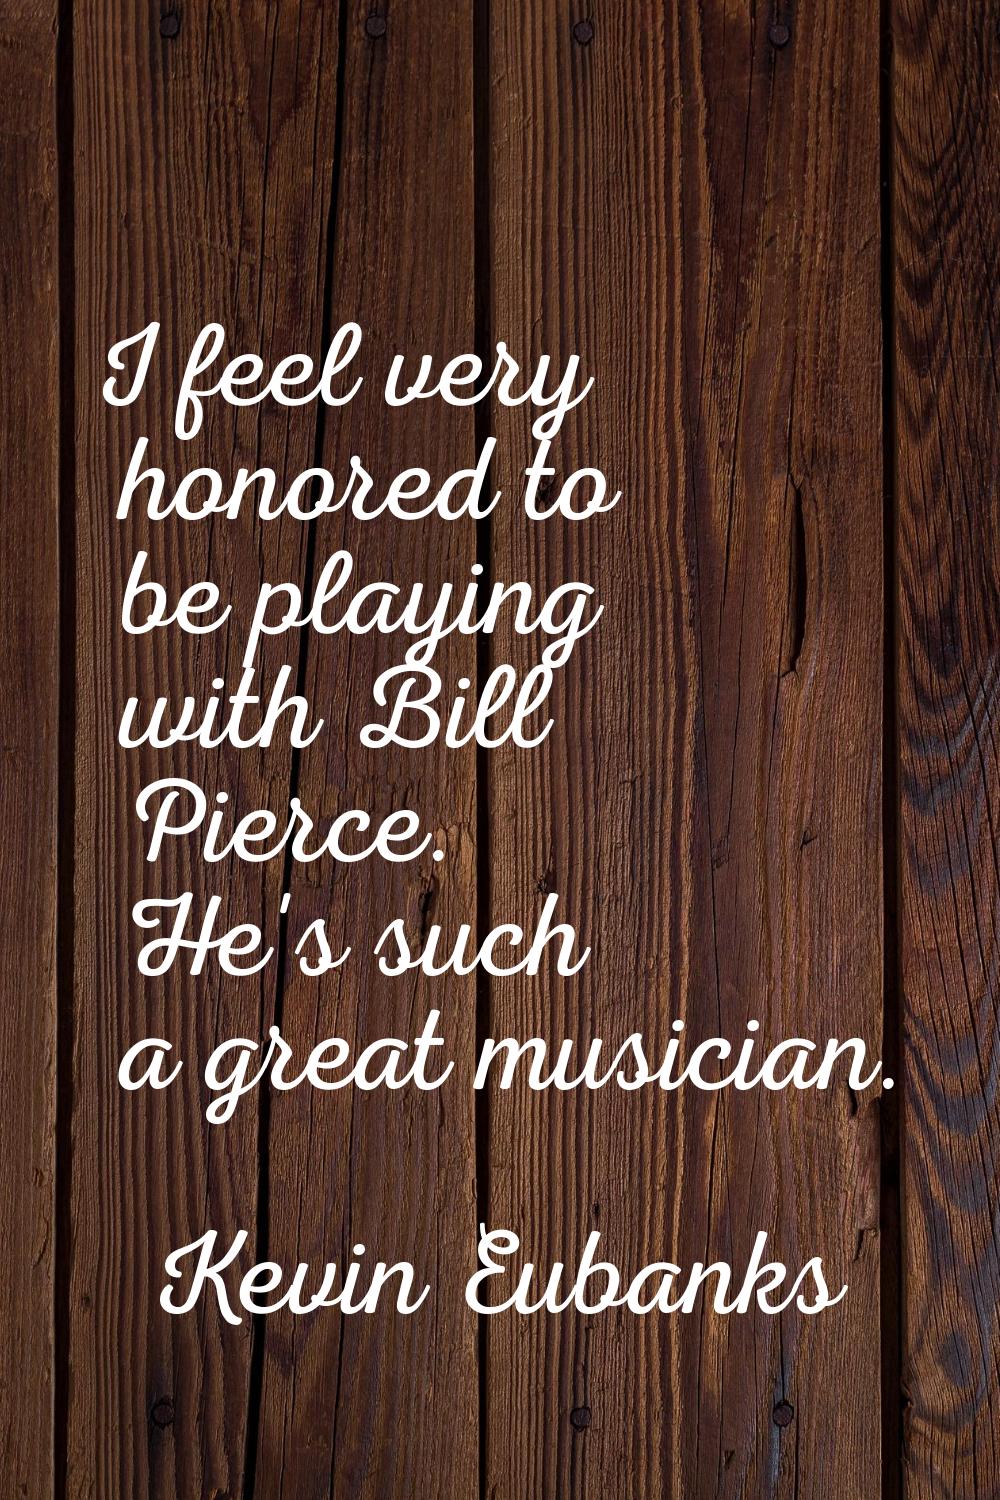 I feel very honored to be playing with Bill Pierce. He's such a great musician.